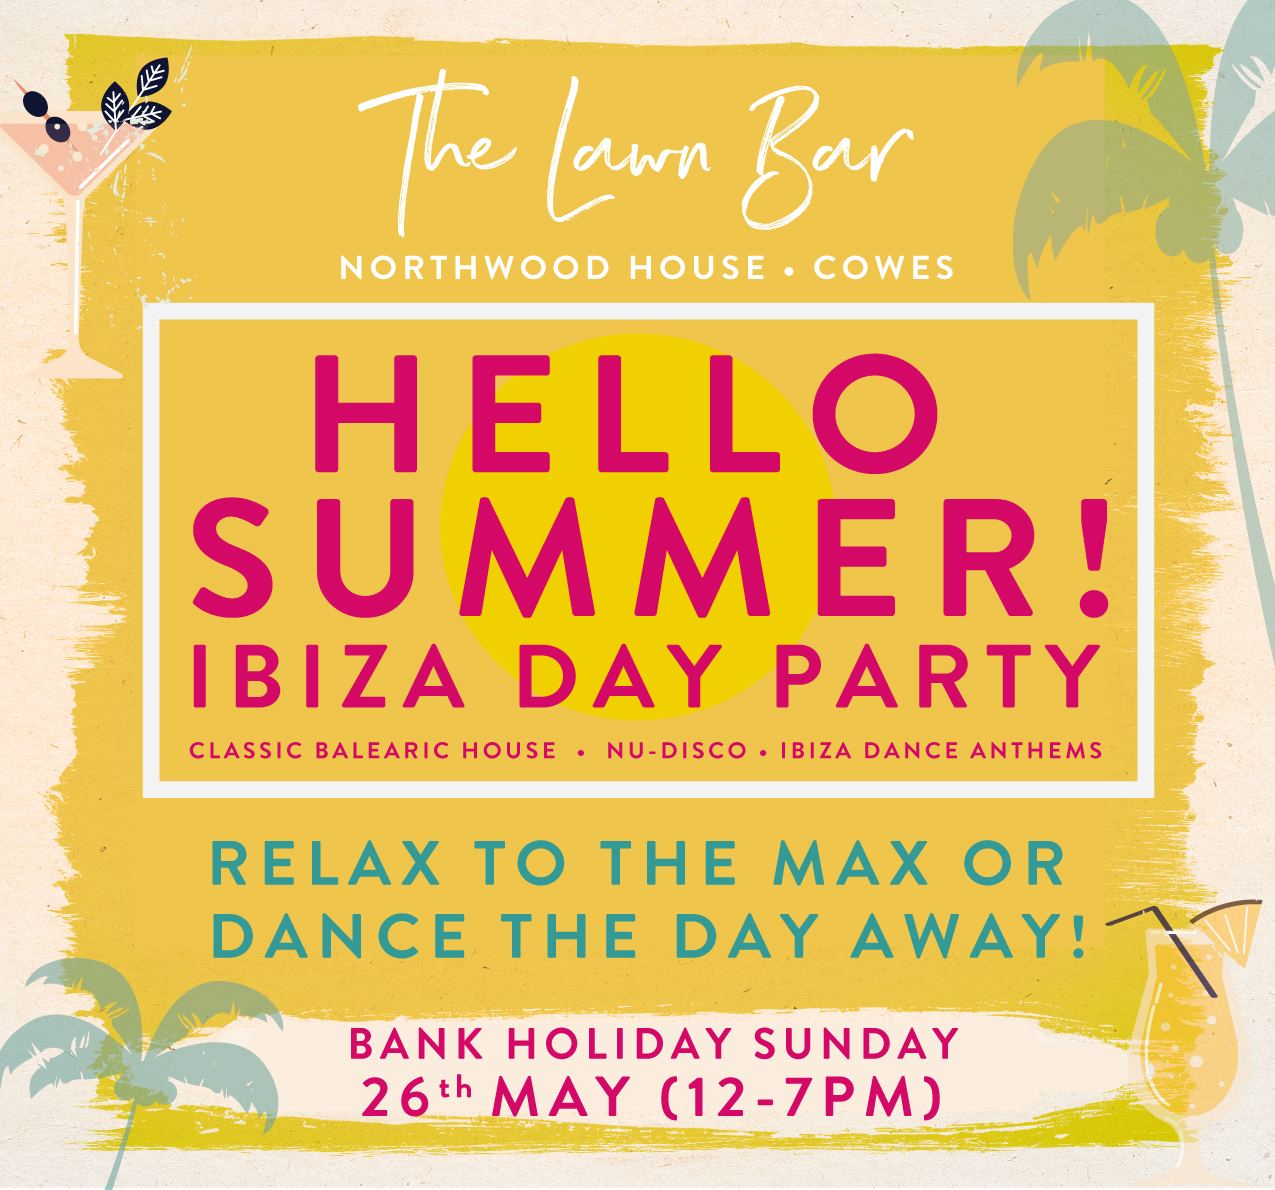 Lawn Bar “Hello Summer!” Ibiza Day Party (Tickets available now via the Price is Wight)